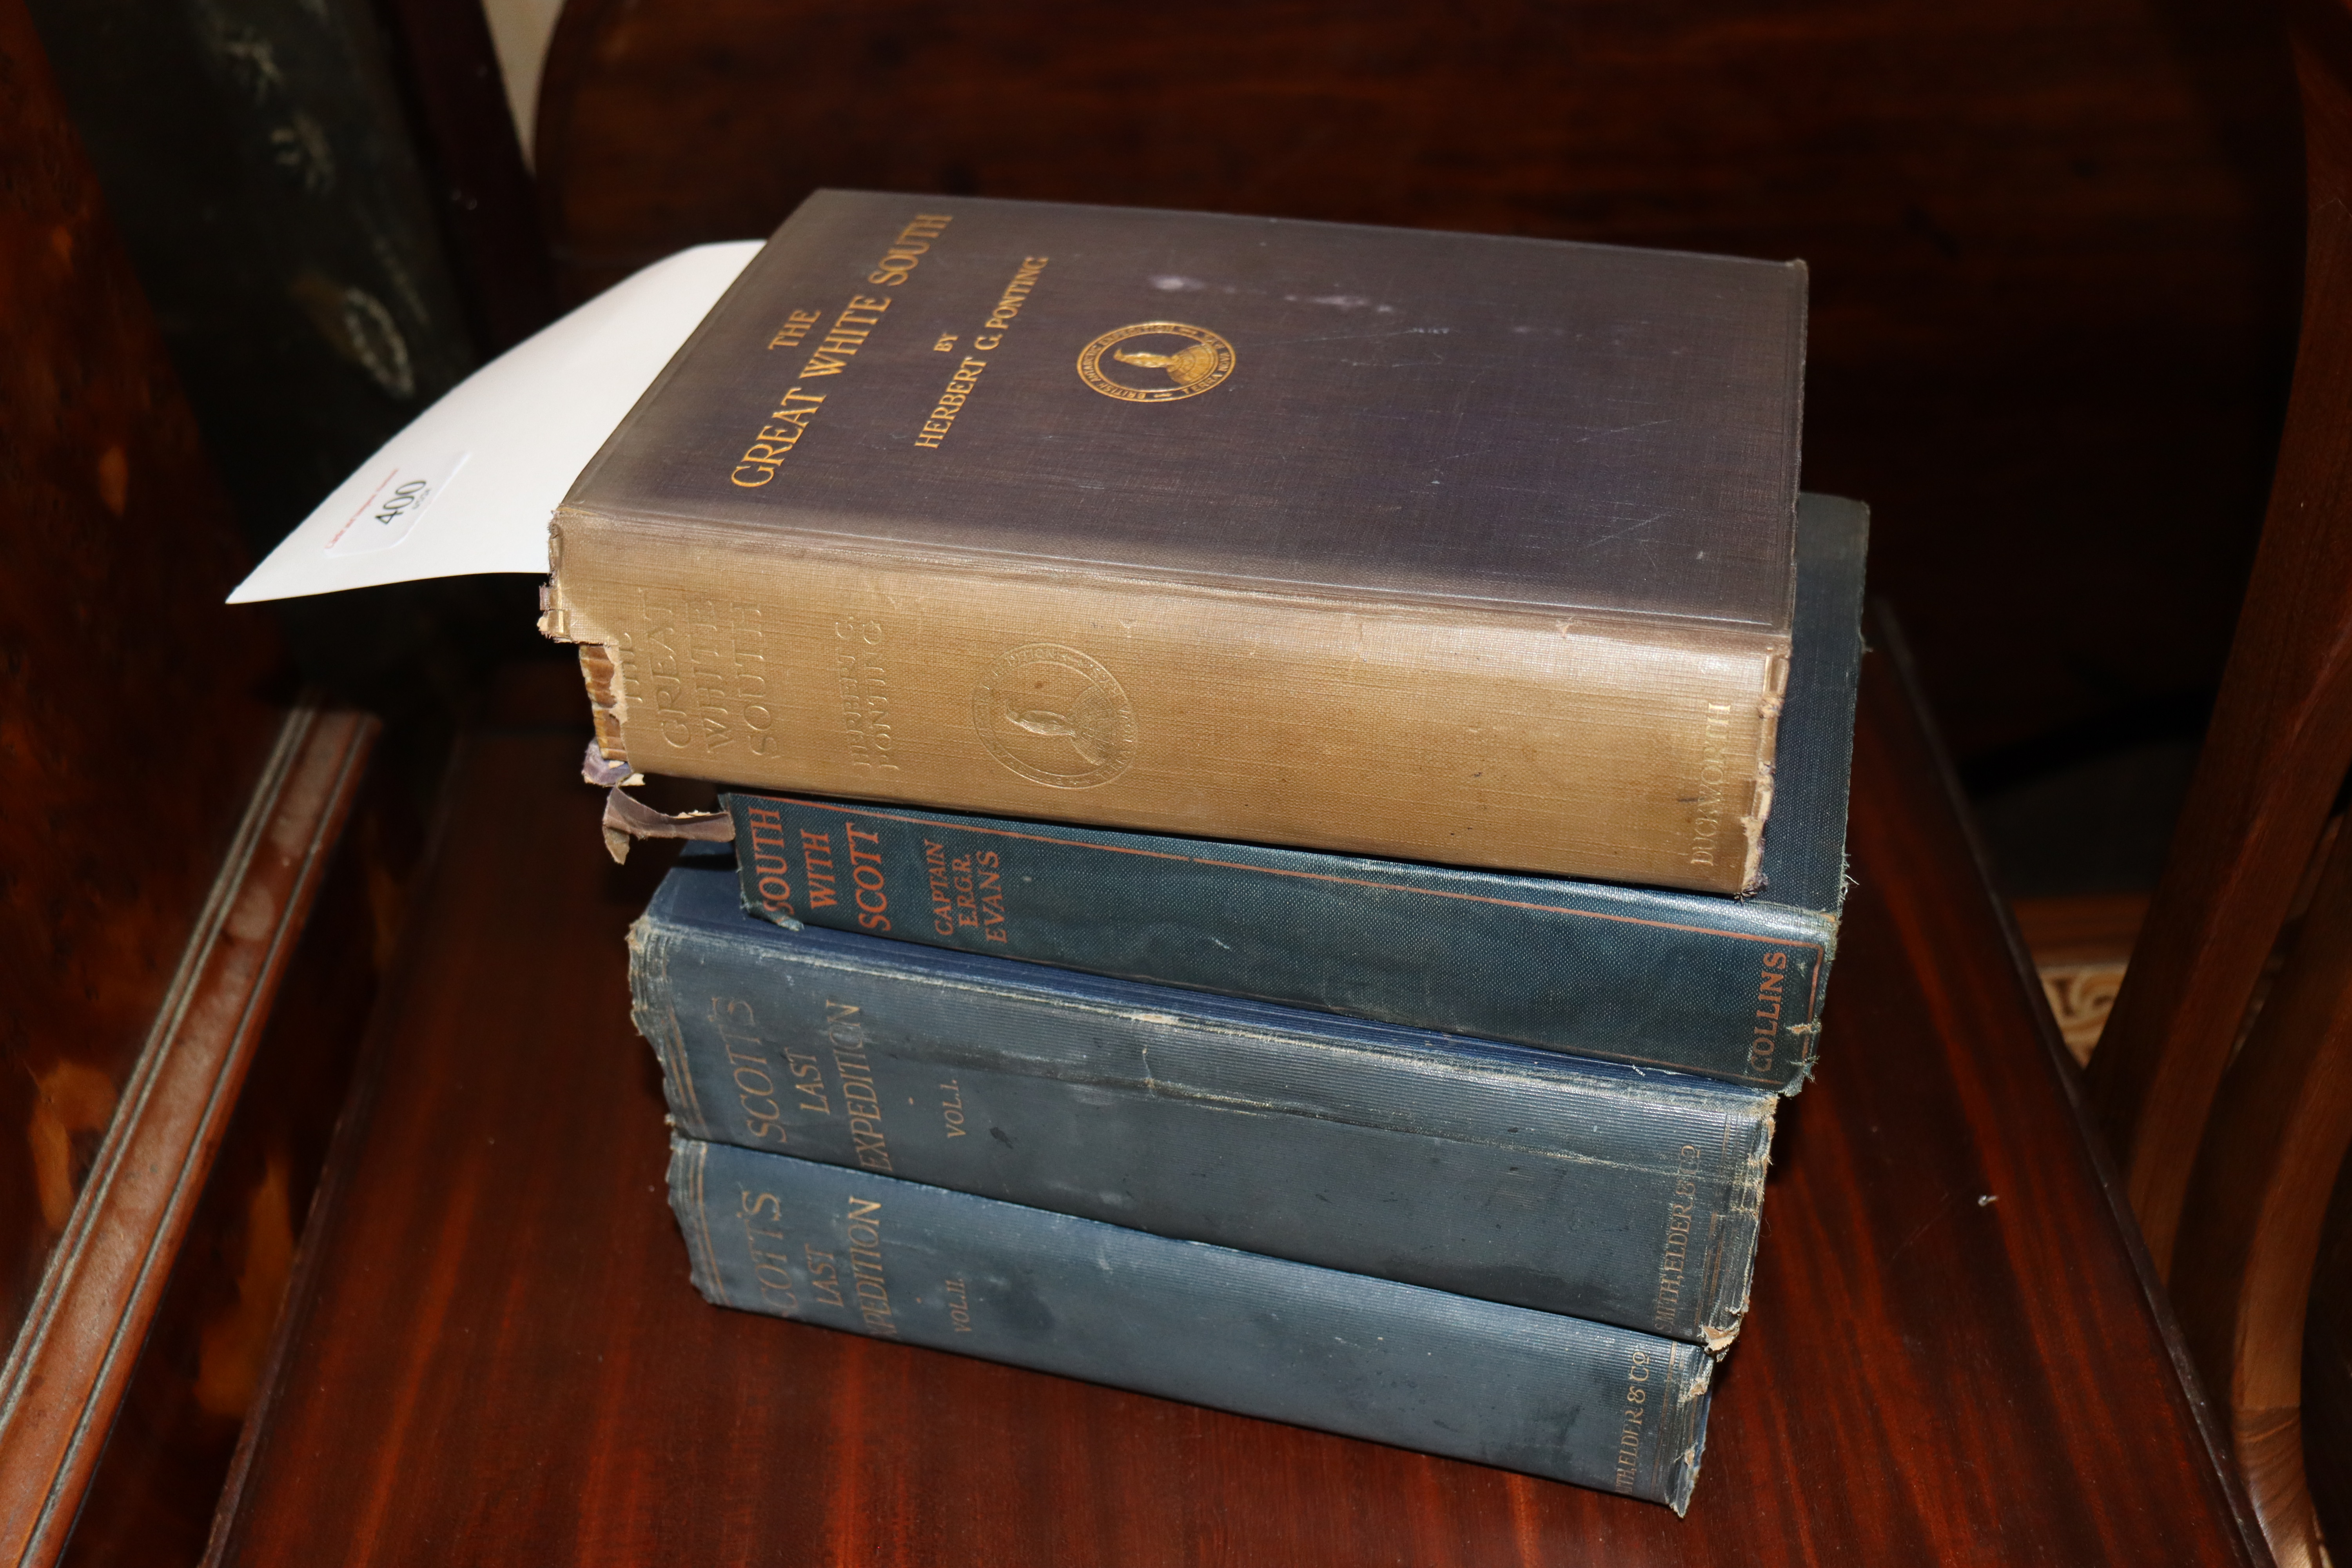 Scott's Last Expedition, volumes 1 & 2; and "South